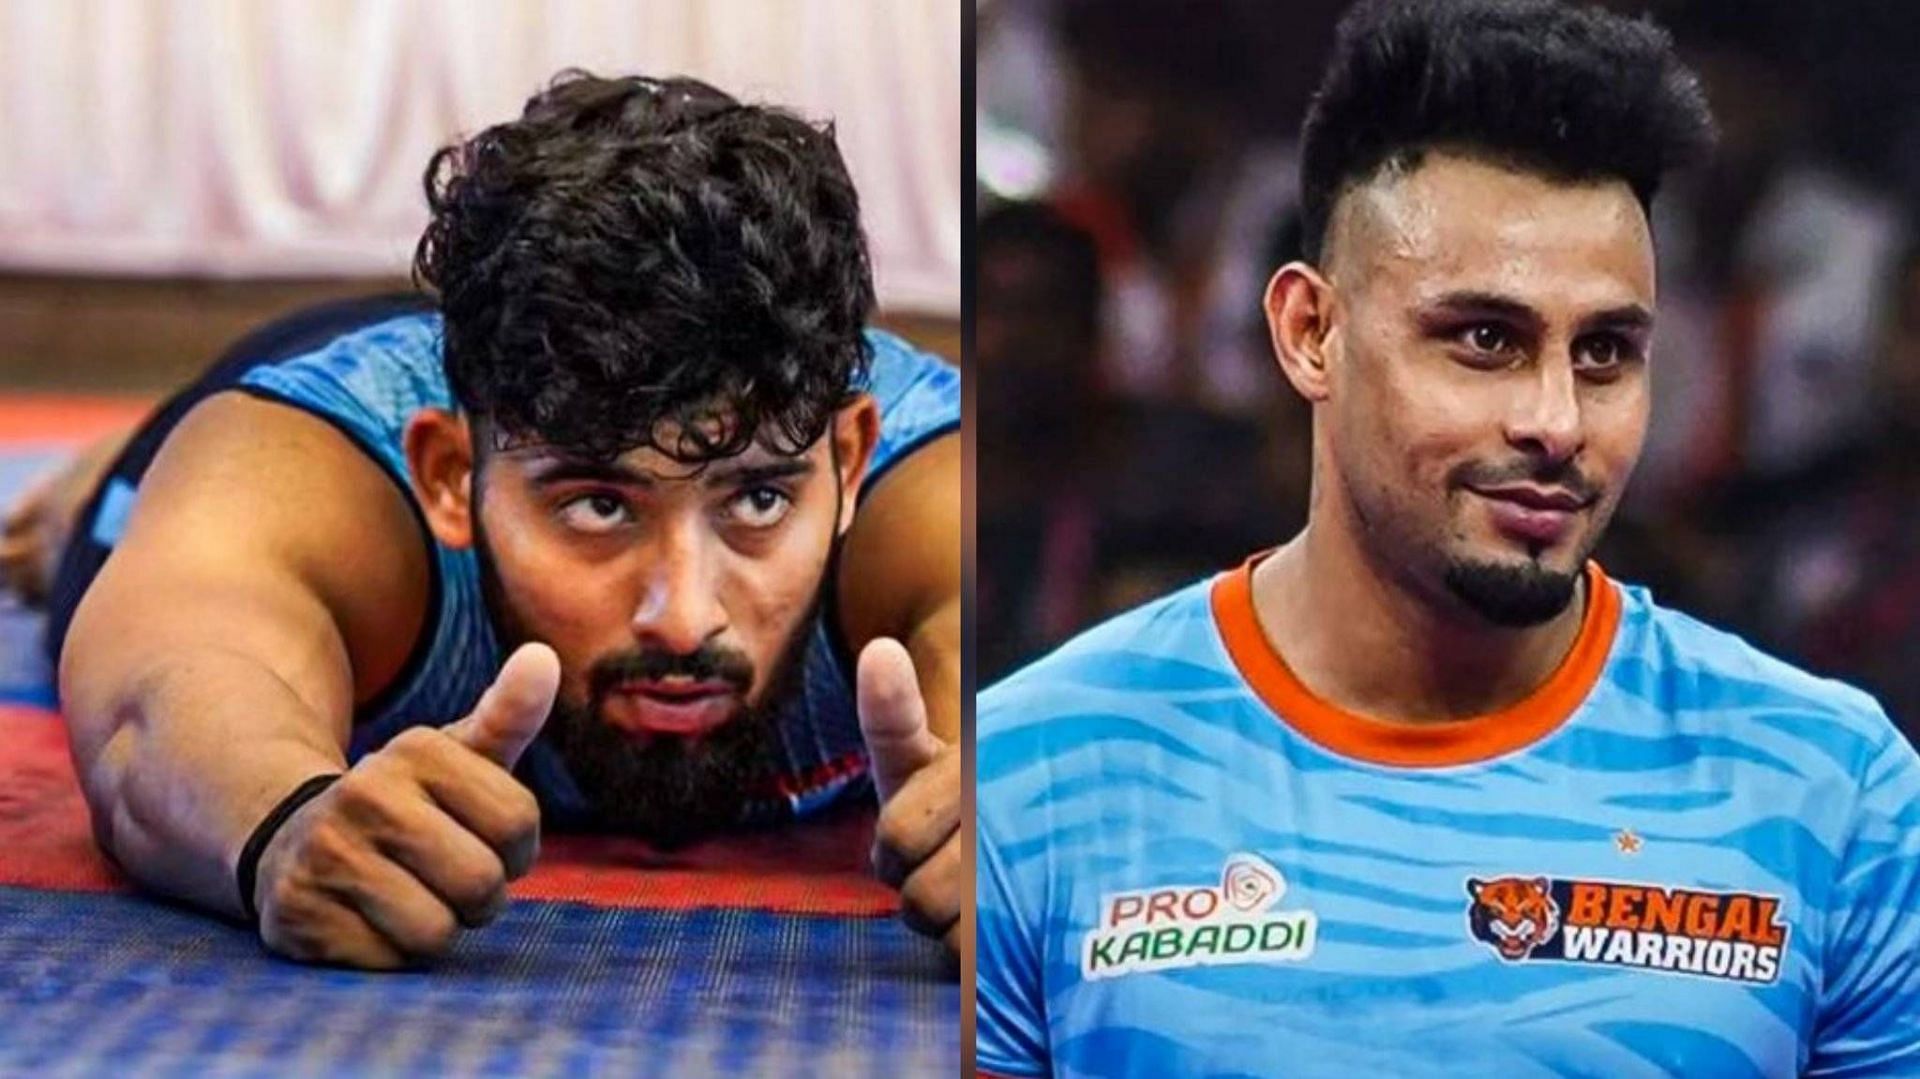 Bengal Warriors have some top talents in the team (Image: Instagram)